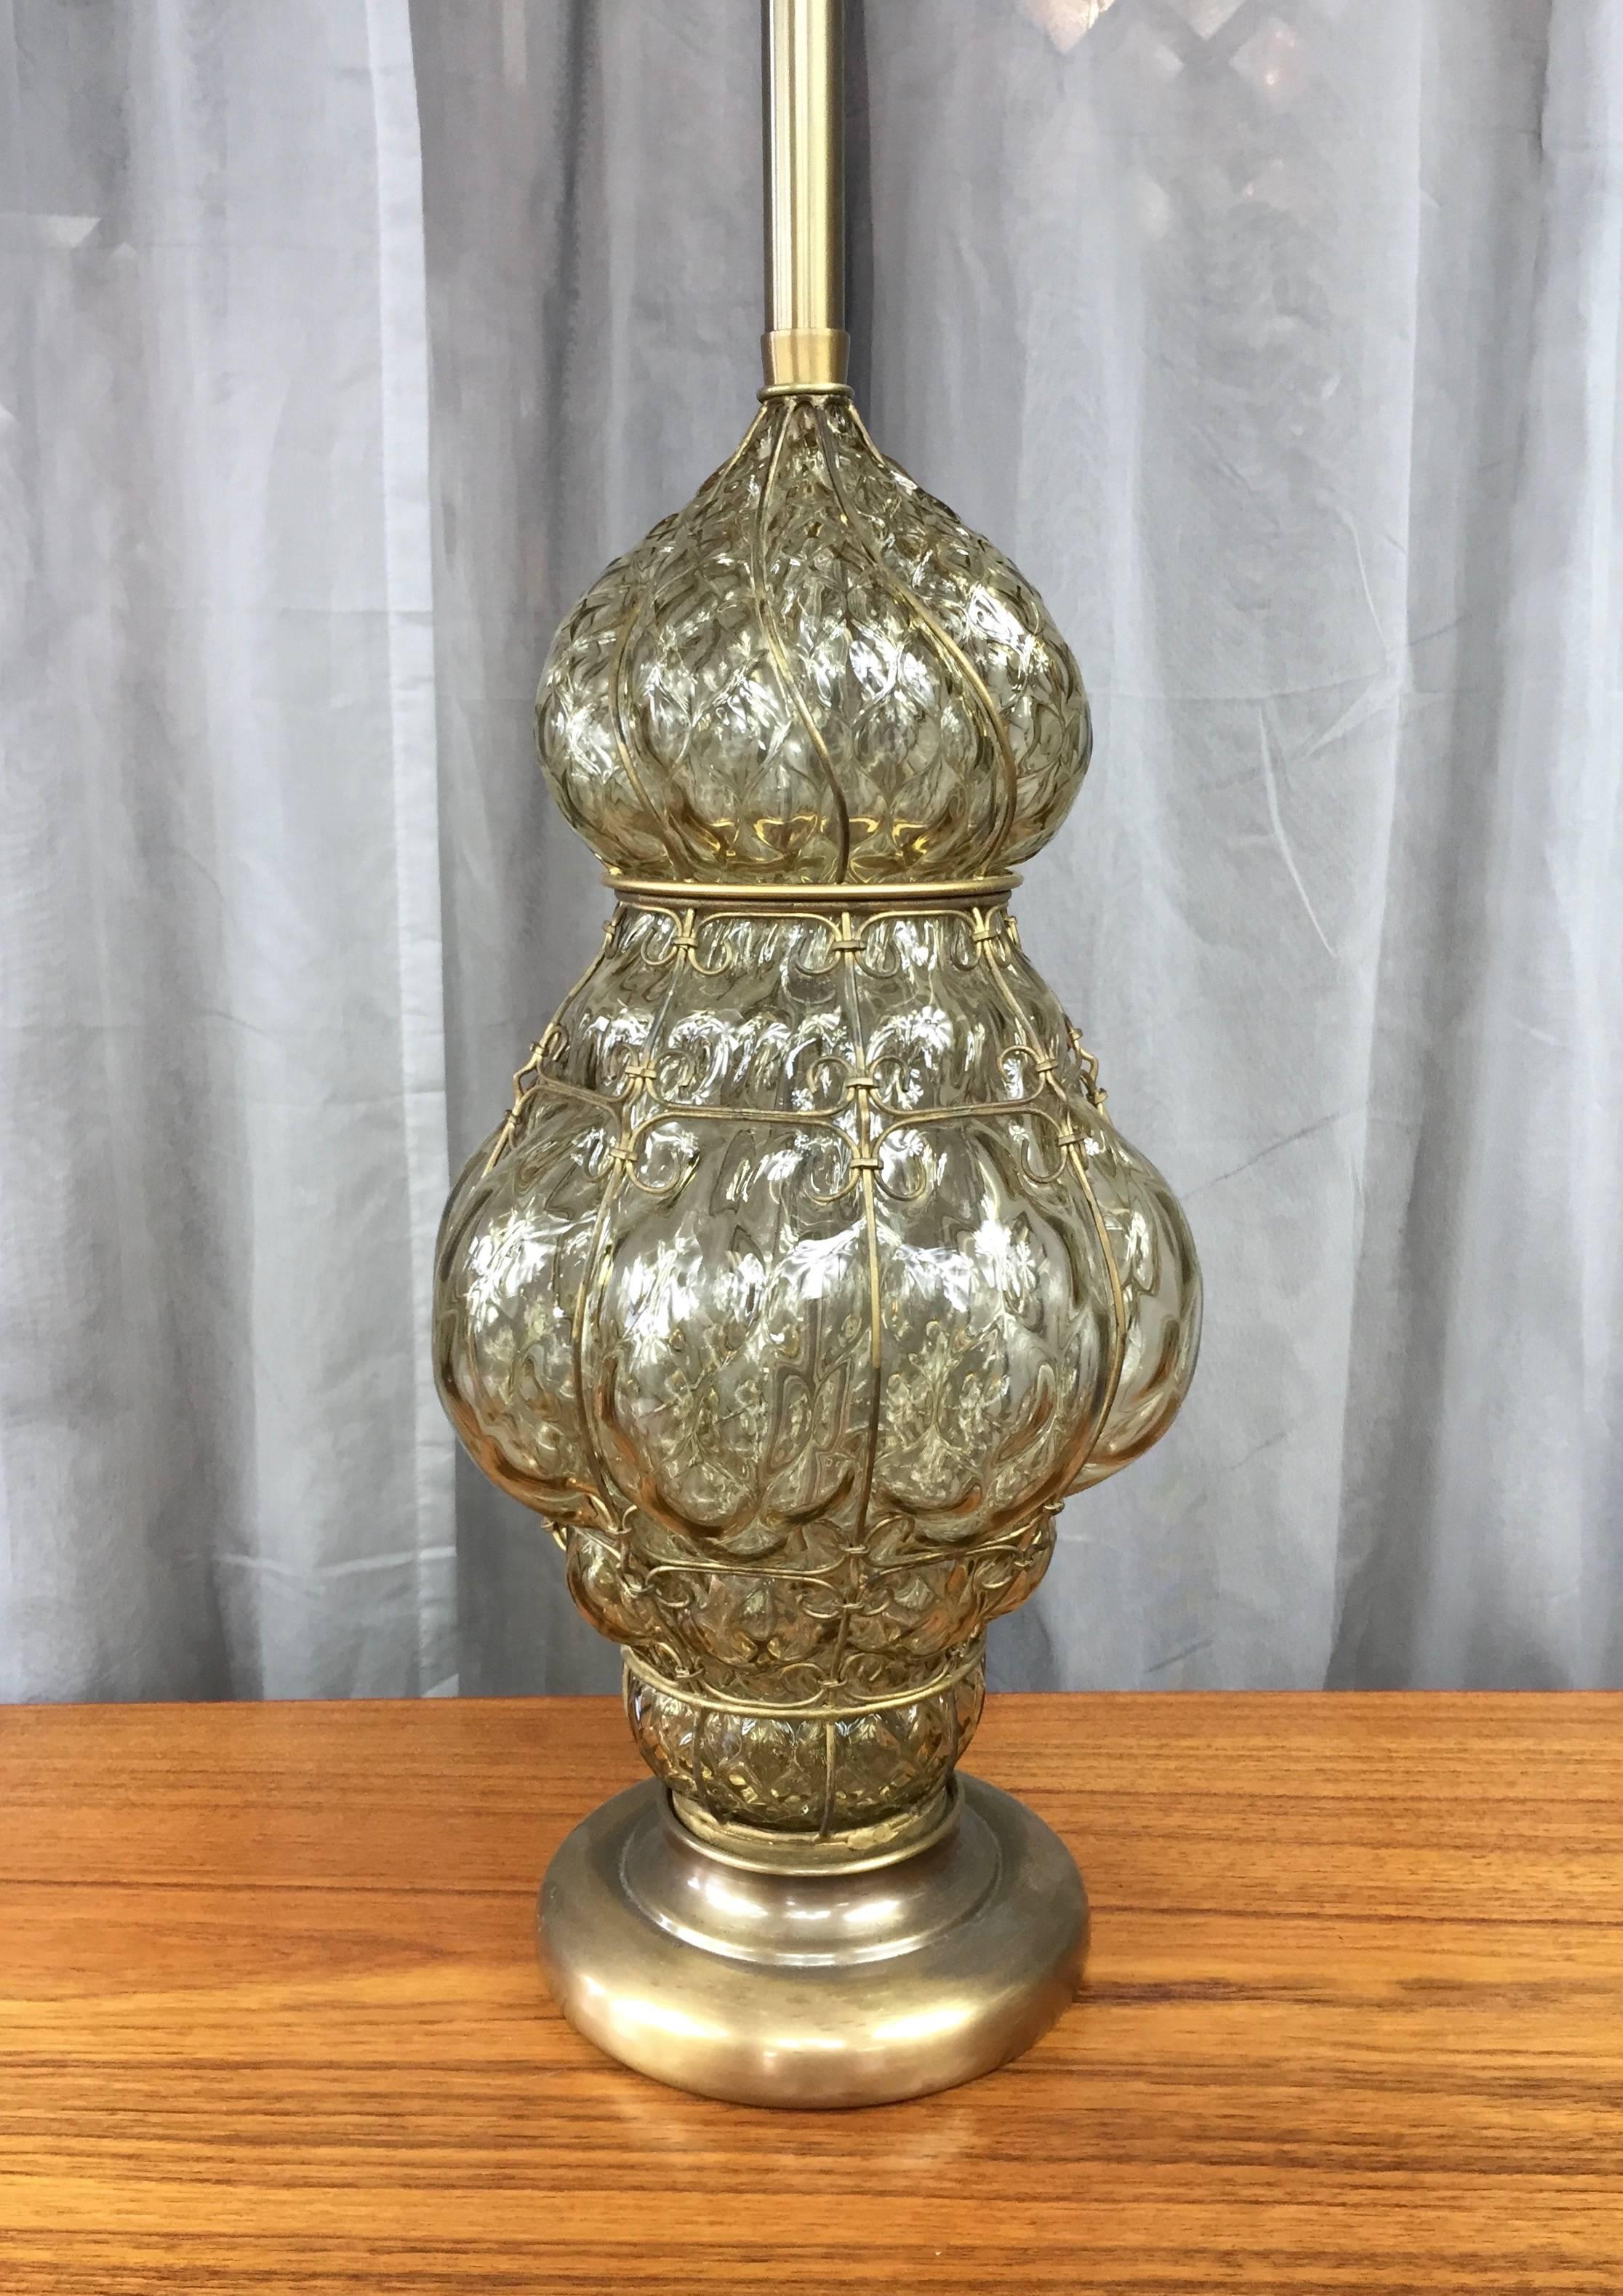 An extra-large optic effect Murano glass table lamp with brass base and stem, and brass-colored wire cage and finial.

Glass is cool-hued champagne in color, and has a jewel-like appearance due to a dazzling diamond pillow pattern throughout.